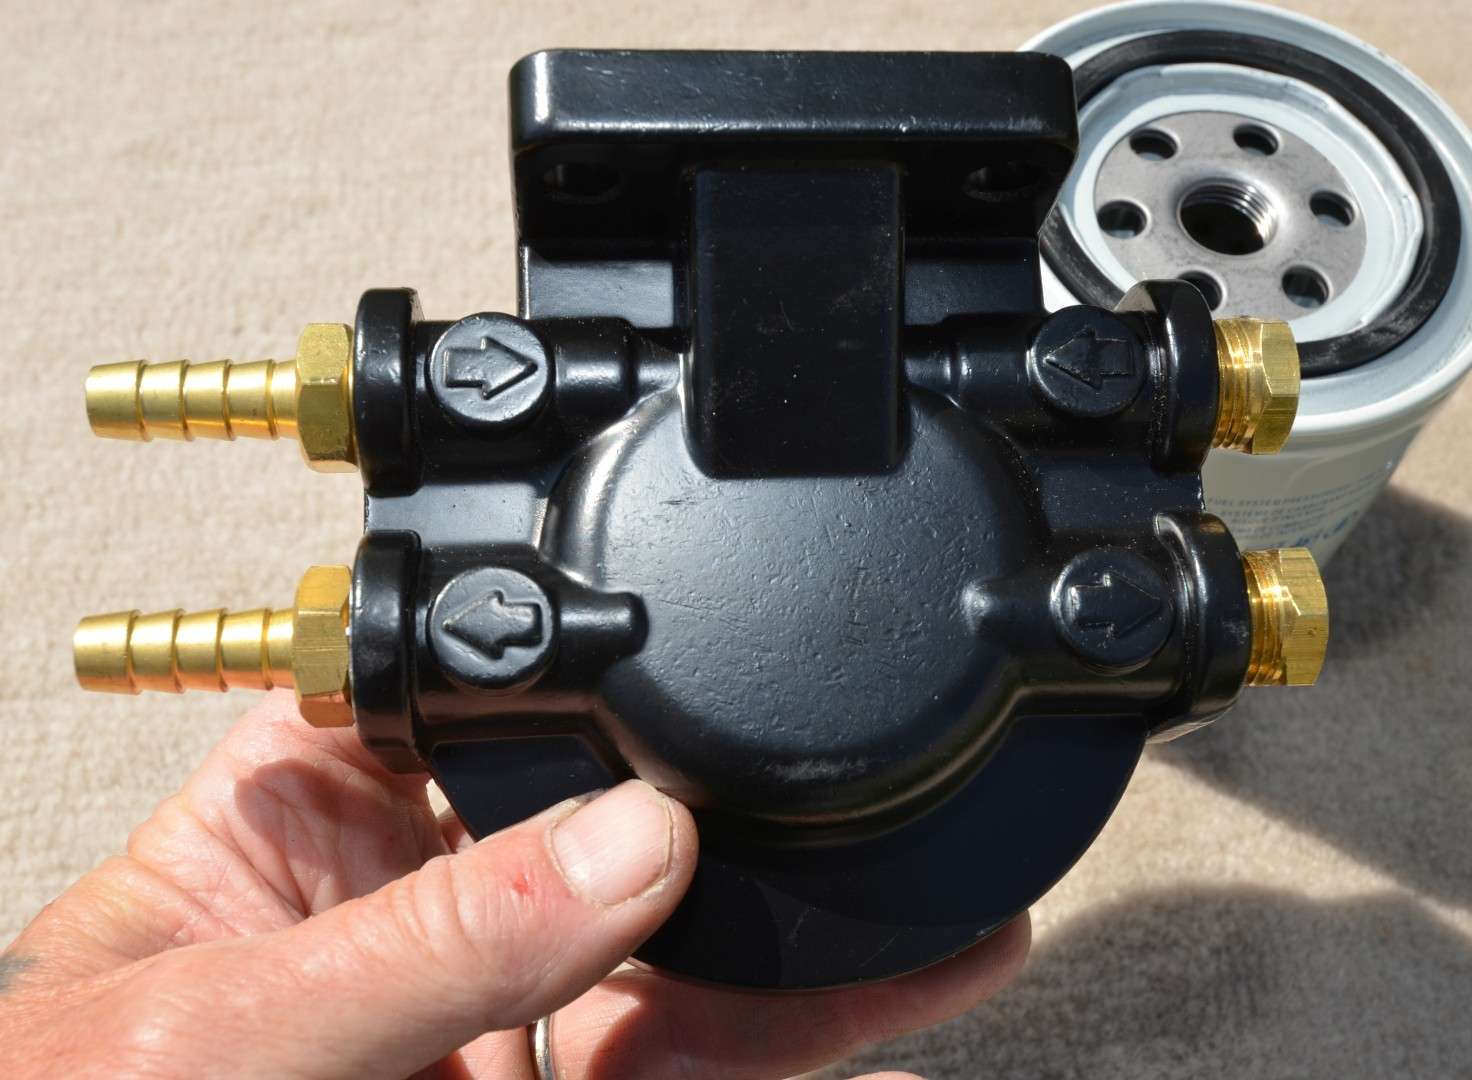 <em>INSTALLING A FUEL/WATER SEPARATOR</em>
<br>The fuel/water separator bracket lets you connect in/out fuel lines on opposite sides or on the same side. I did the latter.